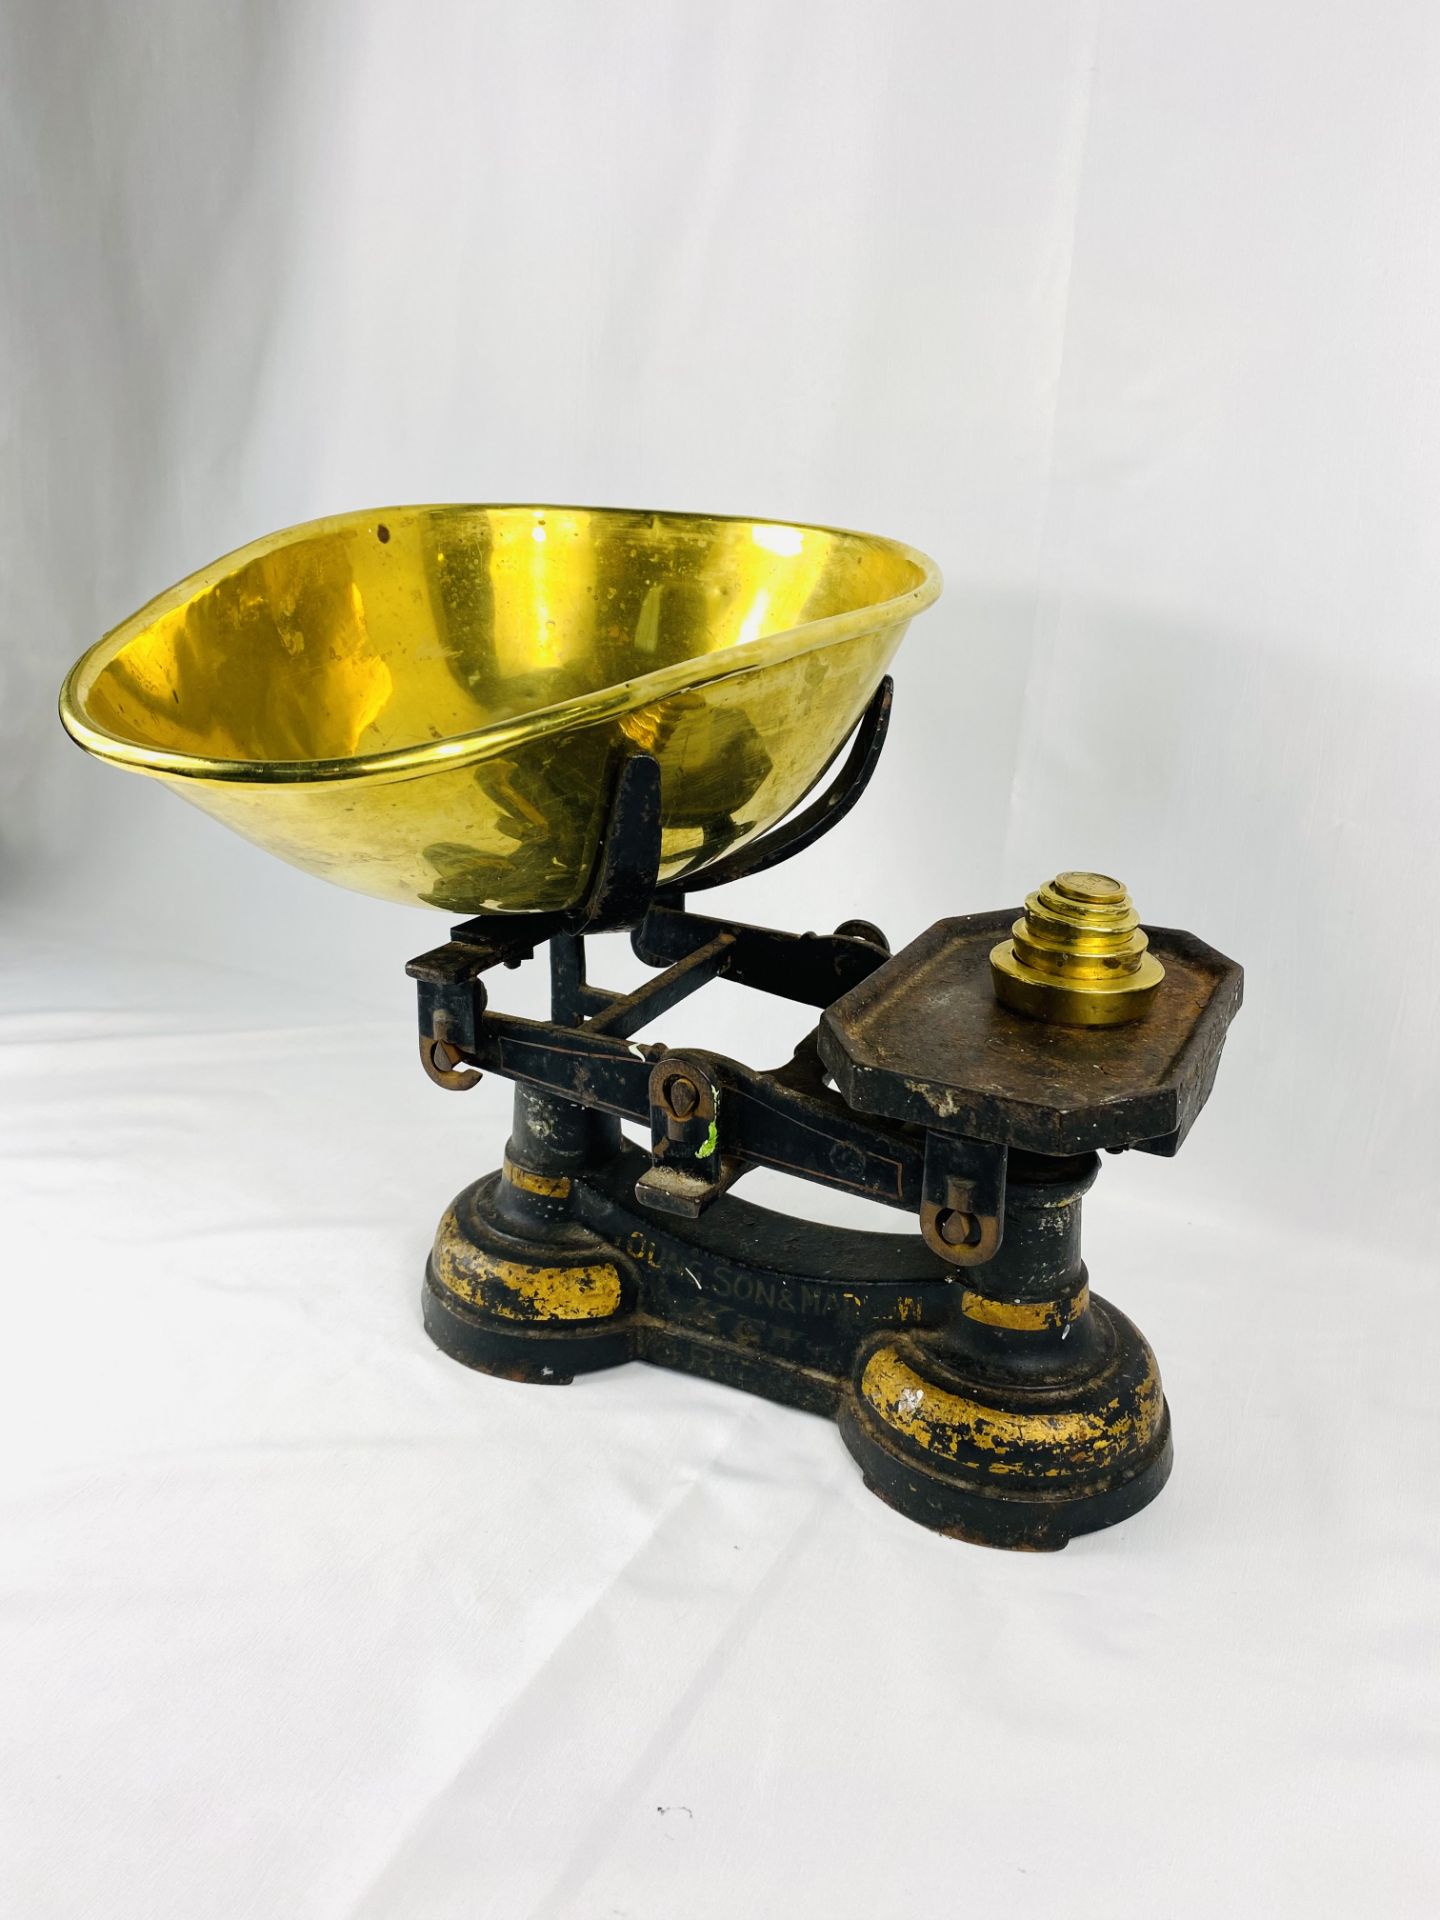 Set of Young Son and Matthew scales with brass bowl and weights, - Image 3 of 3